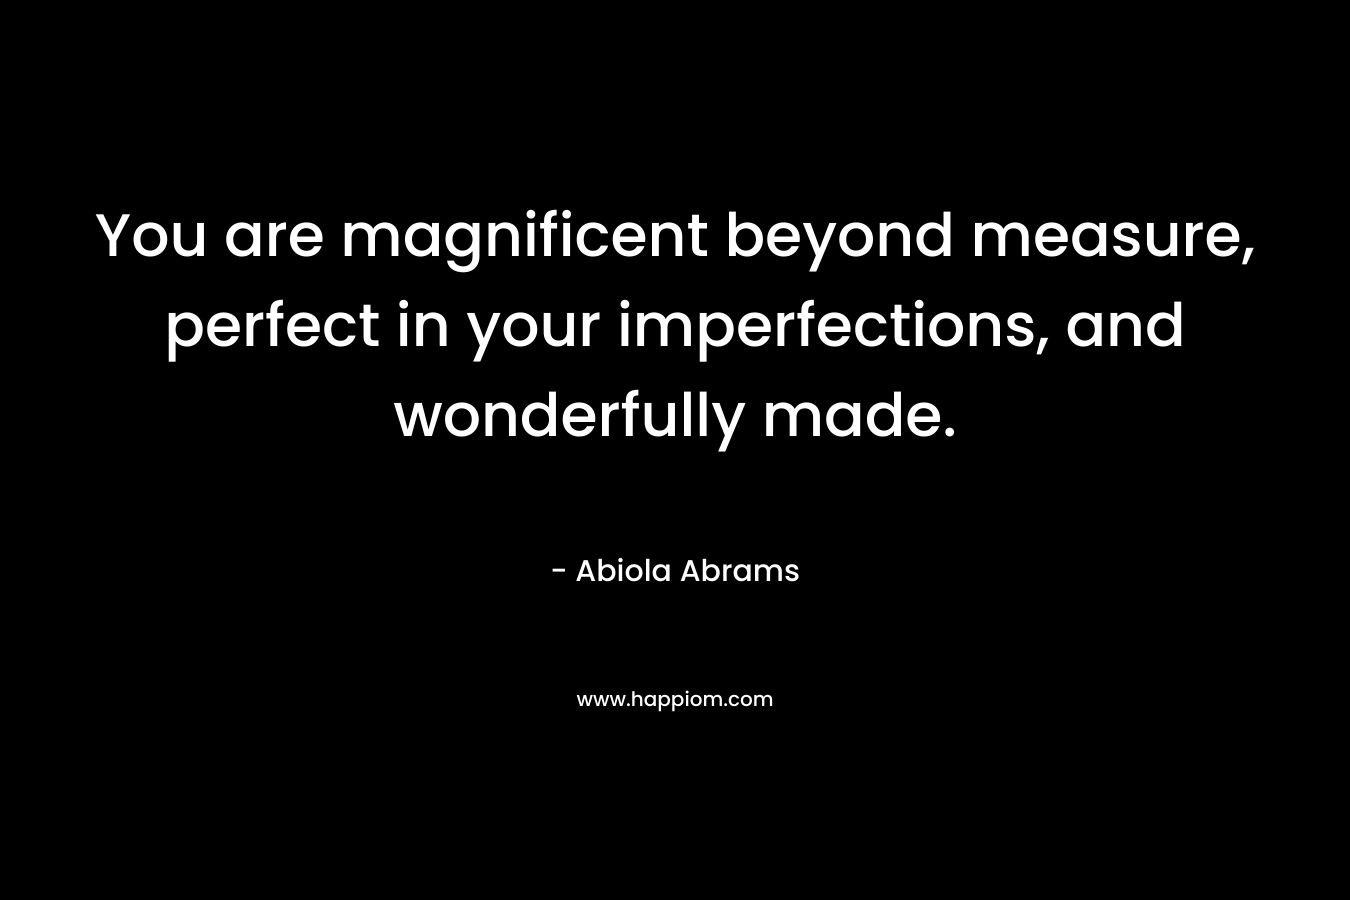 You are magnificent beyond measure, perfect in your imperfections, and wonderfully made.